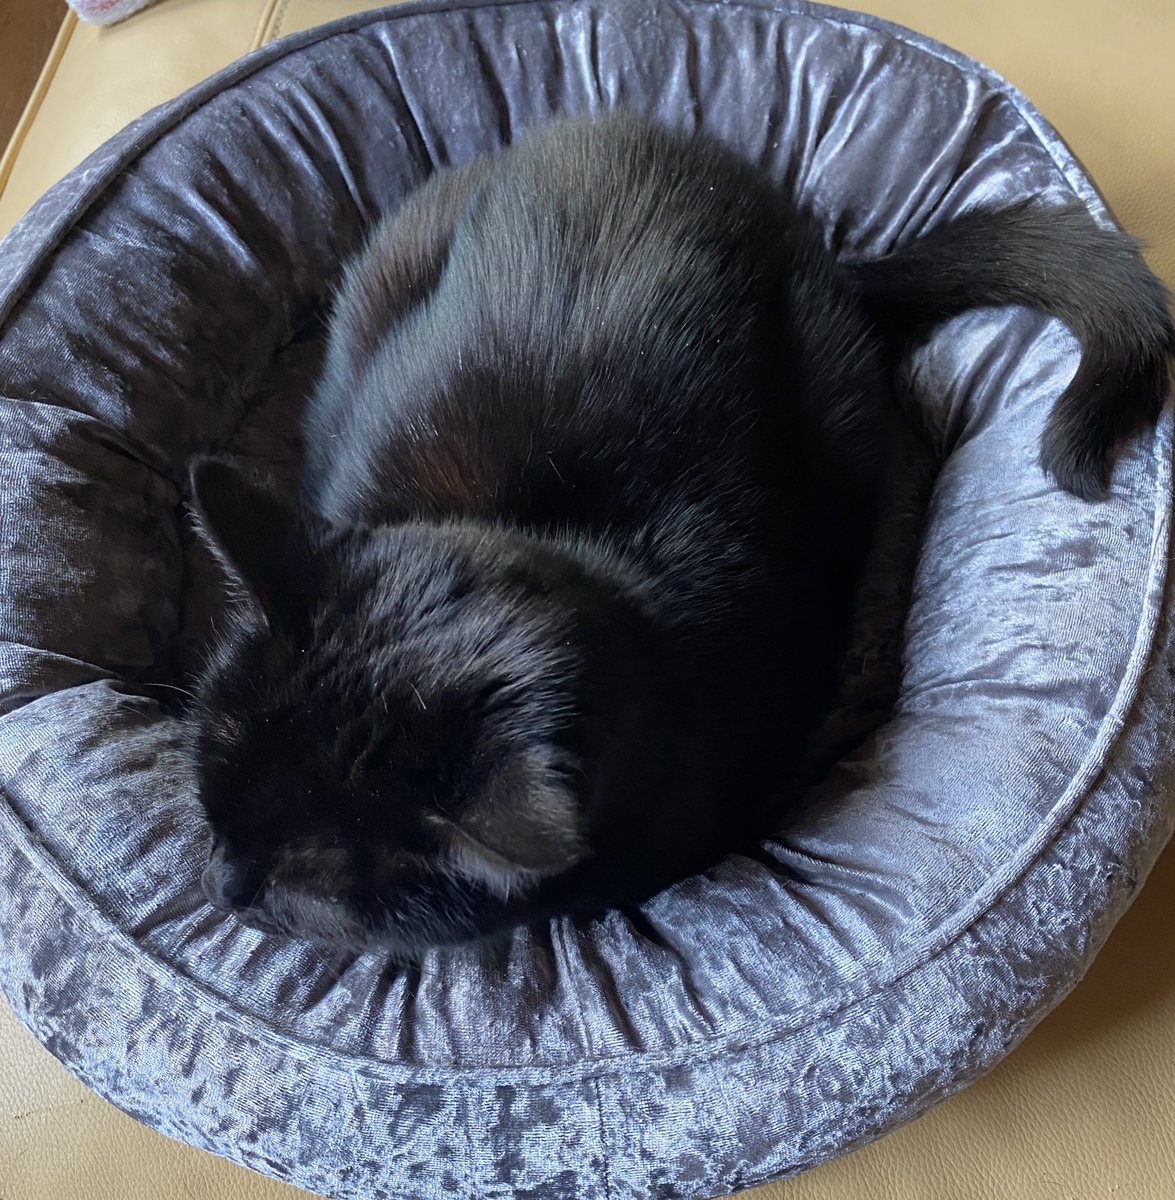 Cute furry black 🍞 being baked in a 🍩 bed by Missy 🐈‍⬛ 😺😺😺 on #kittyloafmonday #panfursquad #CatsOfTwitter #blackcats